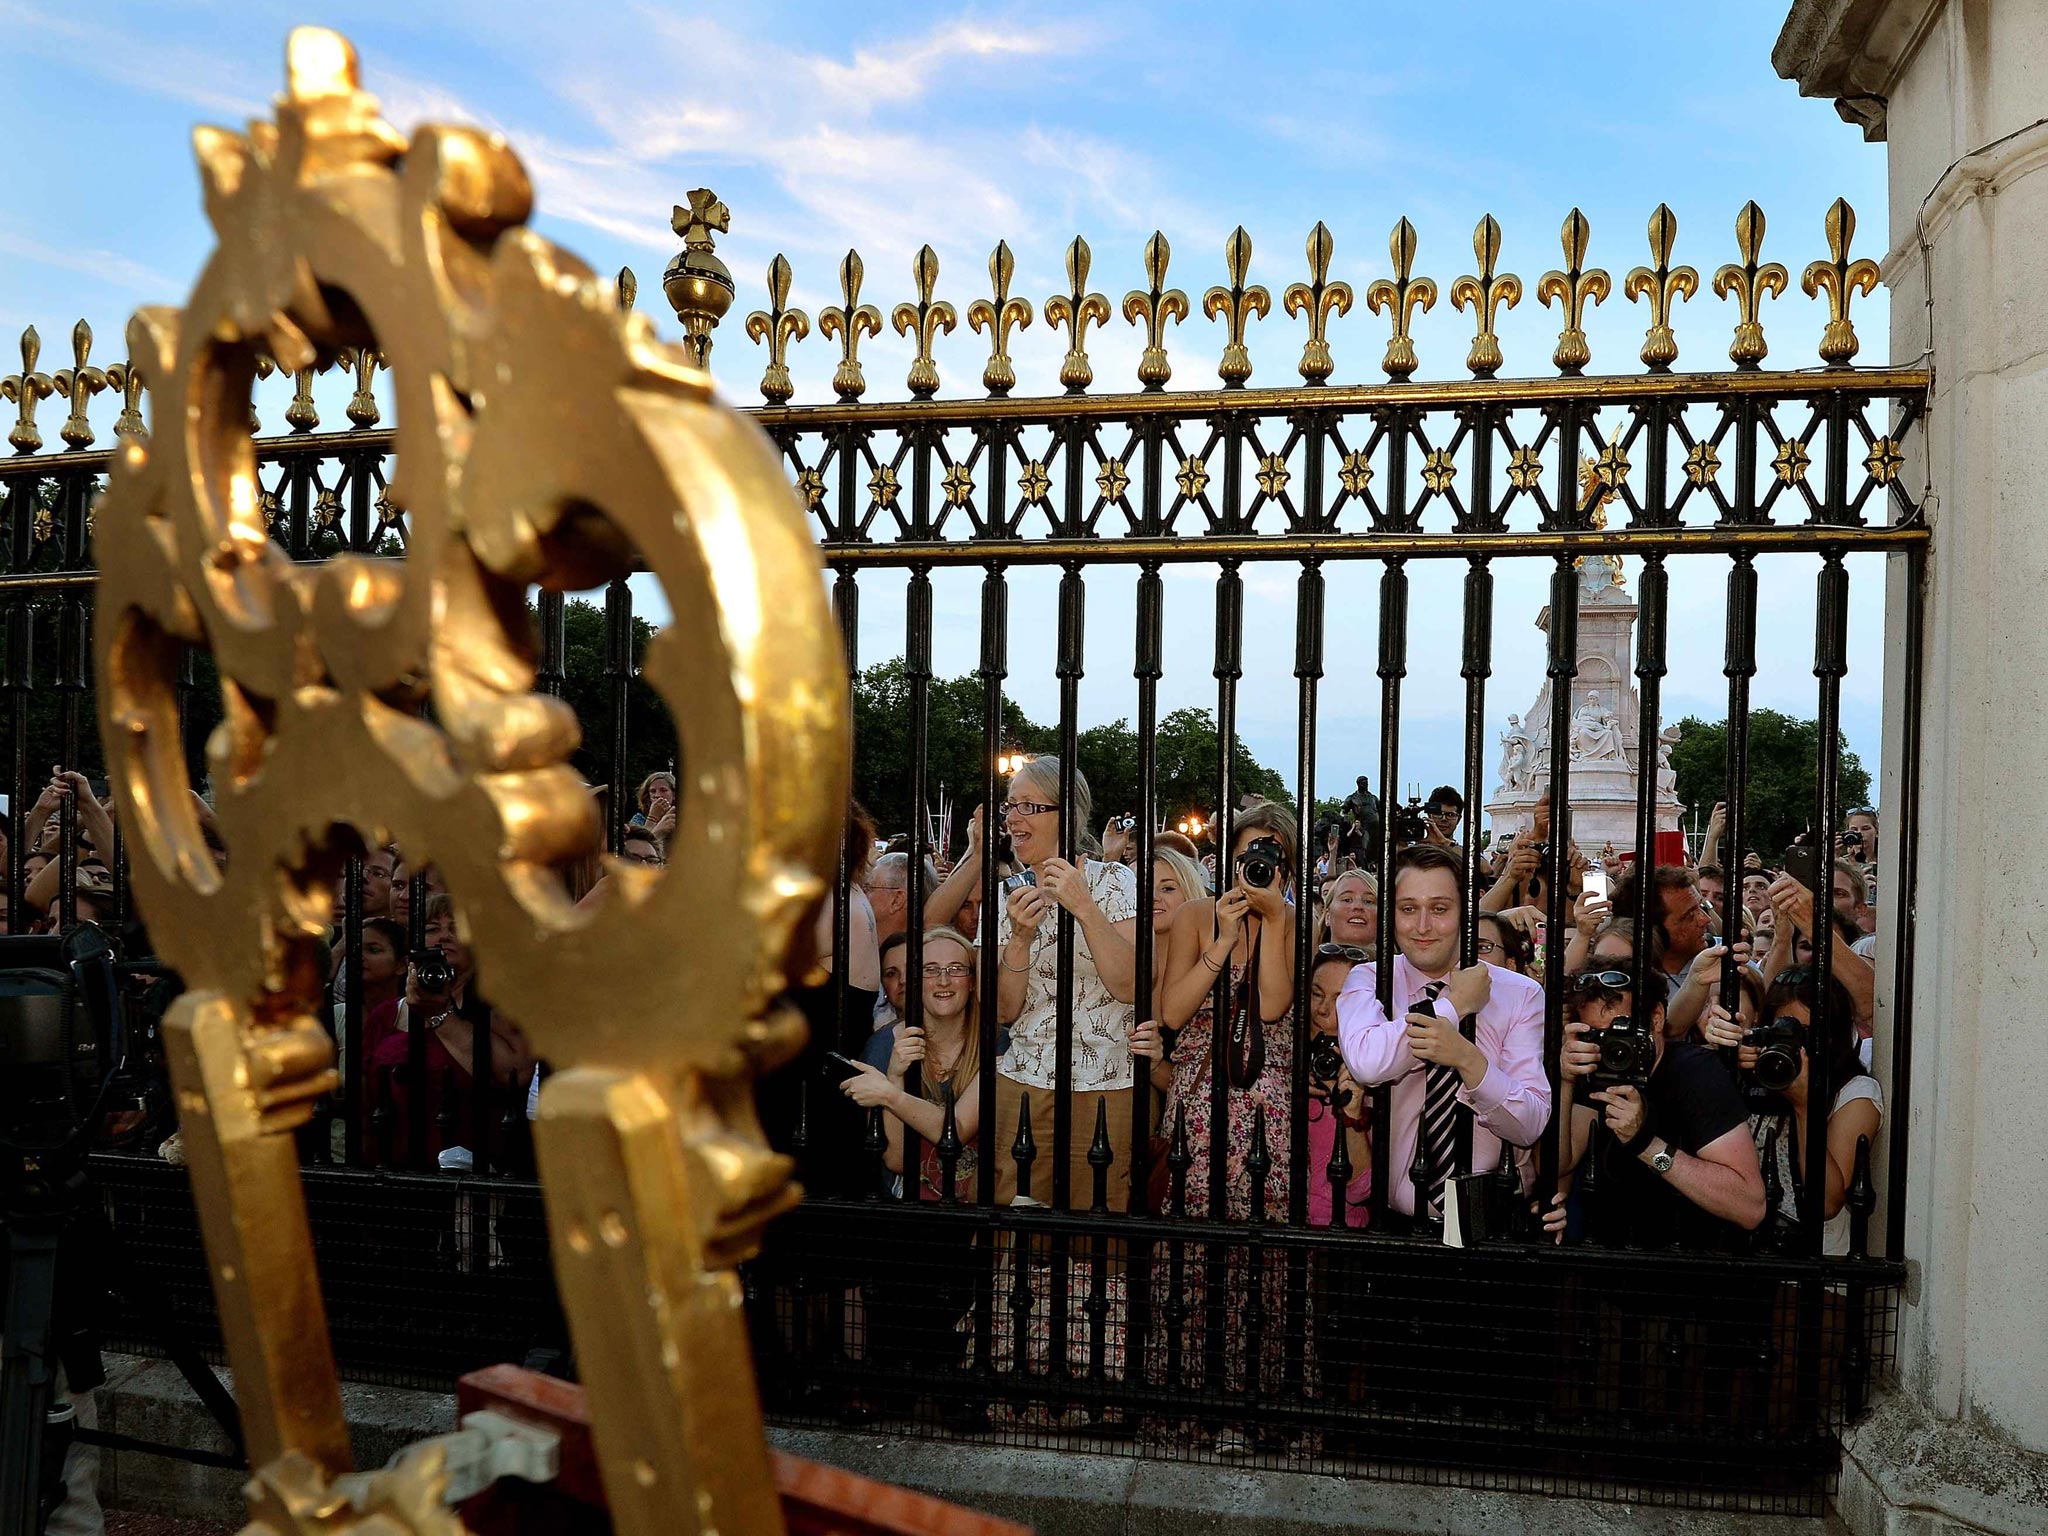 Crowds of people try to look at a notice formally announcing the birth of a son to the Duke and Duchess of Cambridge, placed in the forecourt of Buckingham Palace